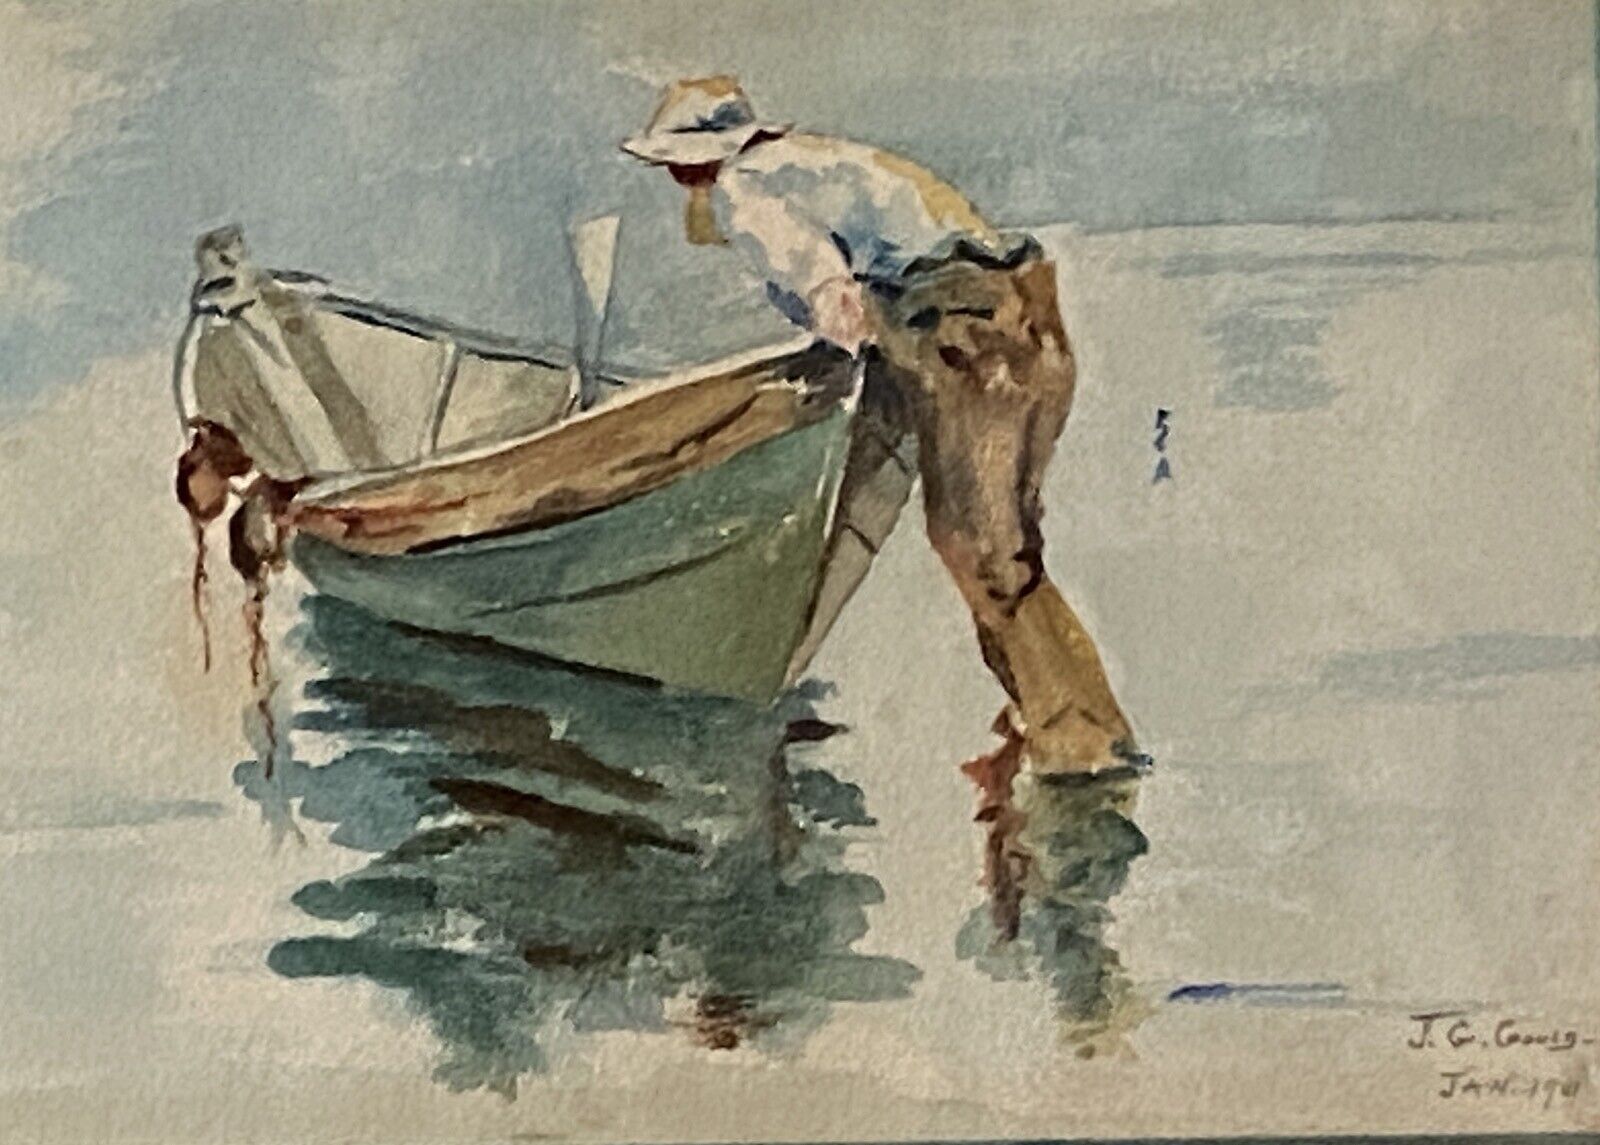 J.G. Gould, 1901 Antique Impressionist Watercolor Painting, Man Launching Boat